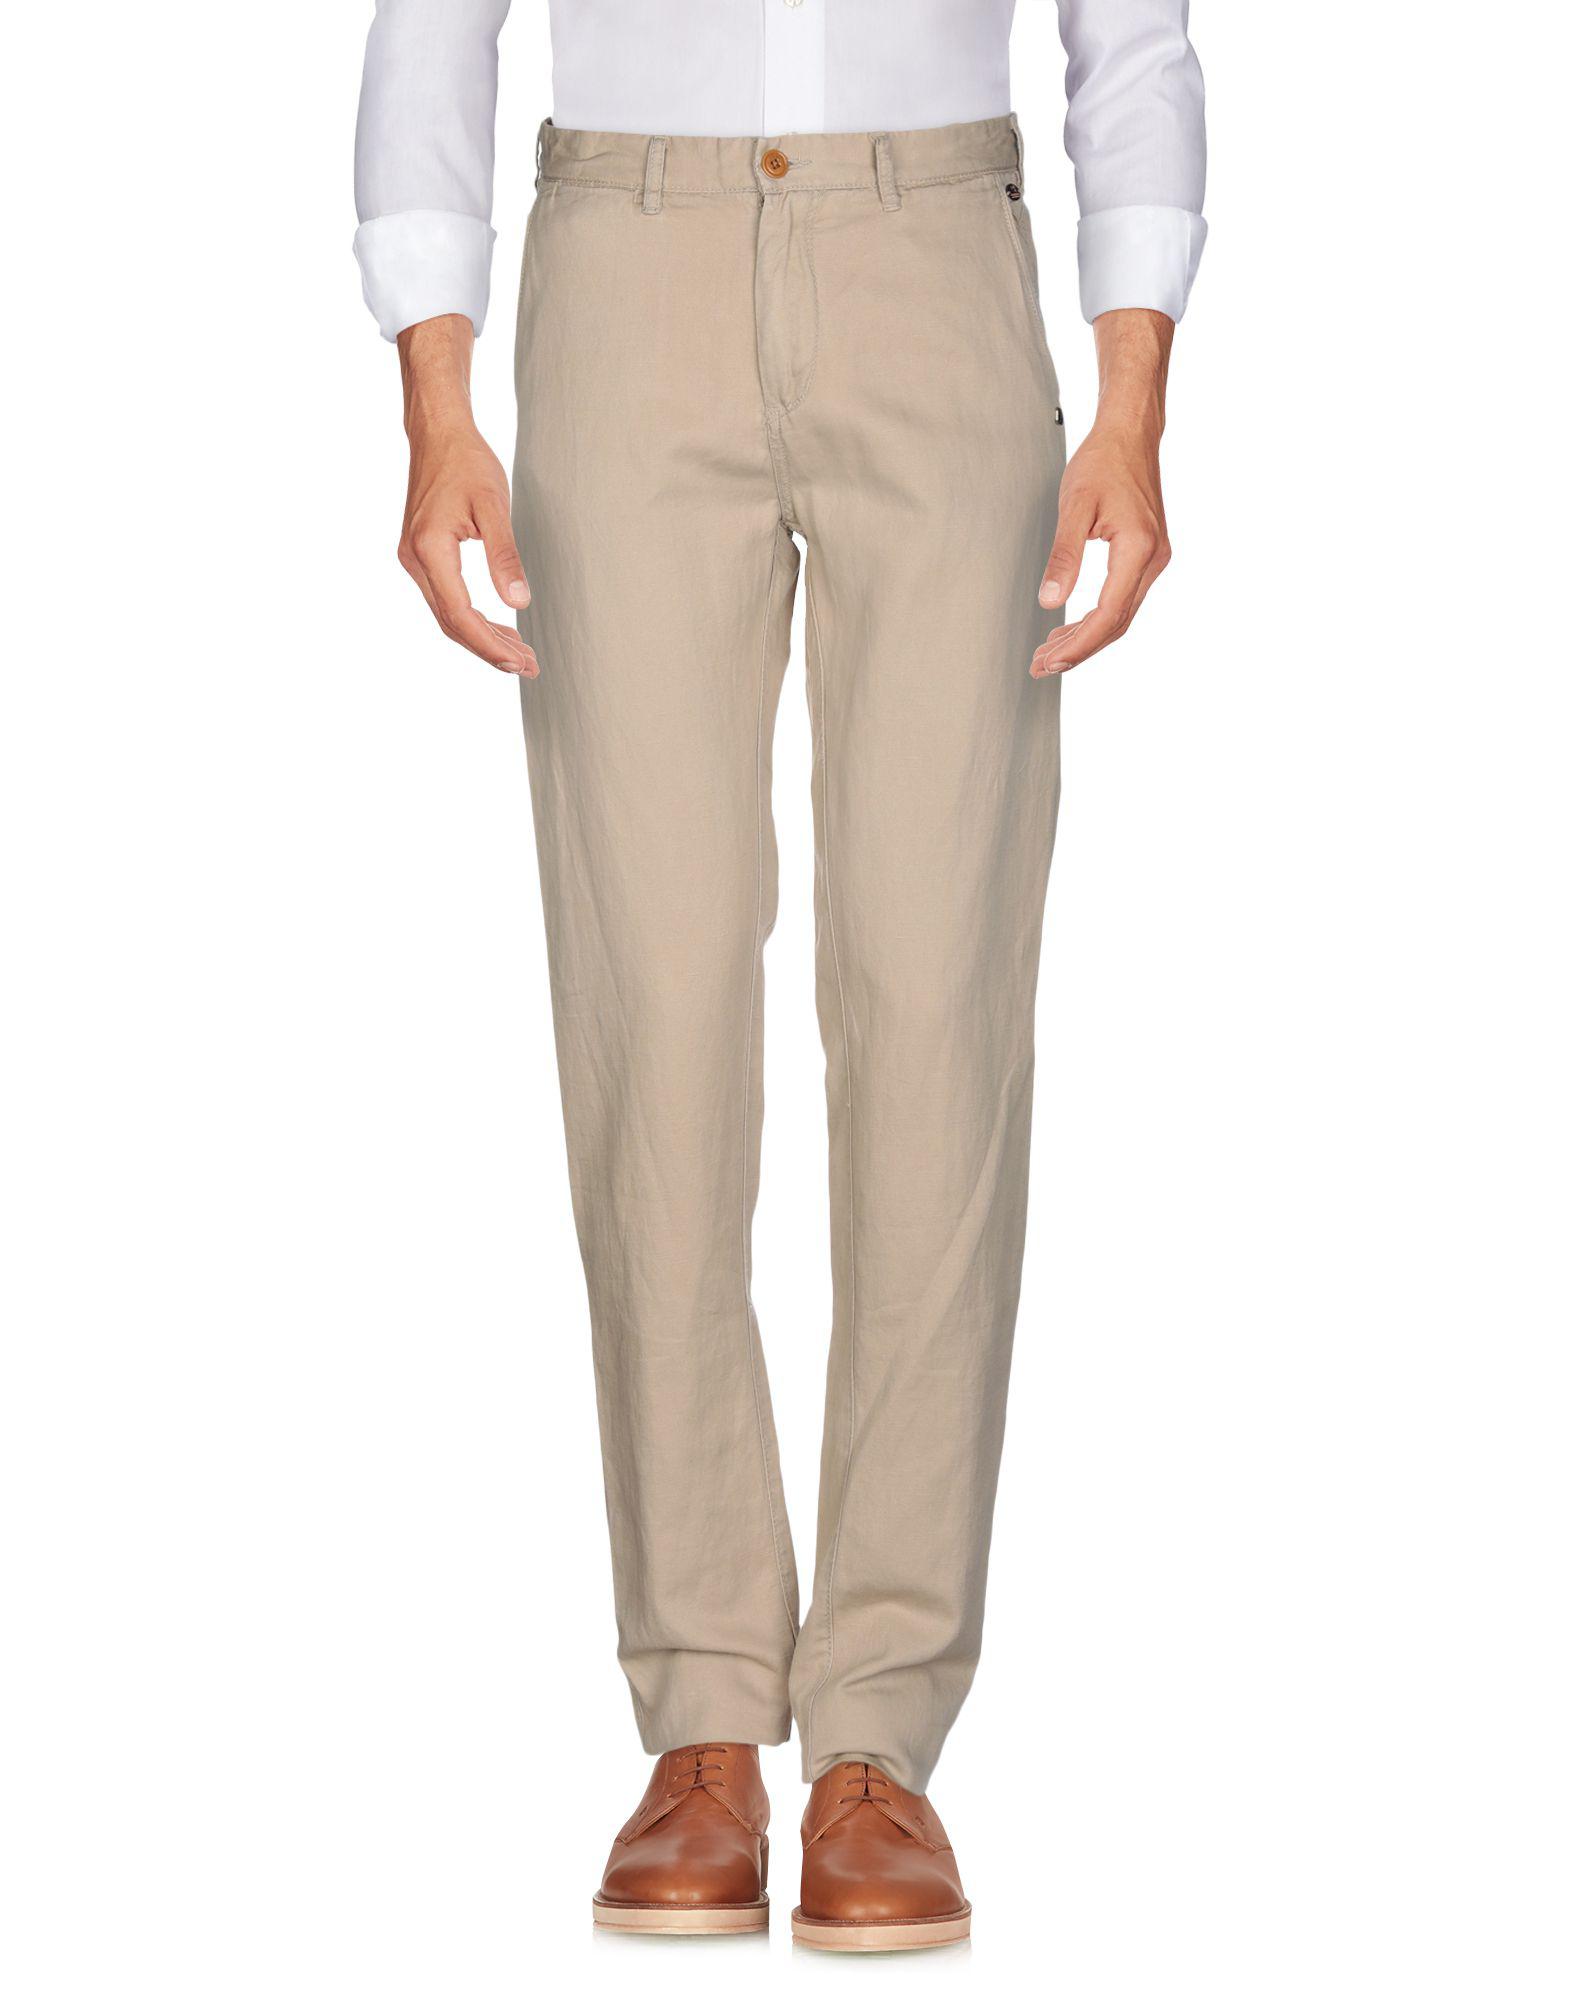 Scotch & Soda Casual Pants in Natural for Men - Lyst